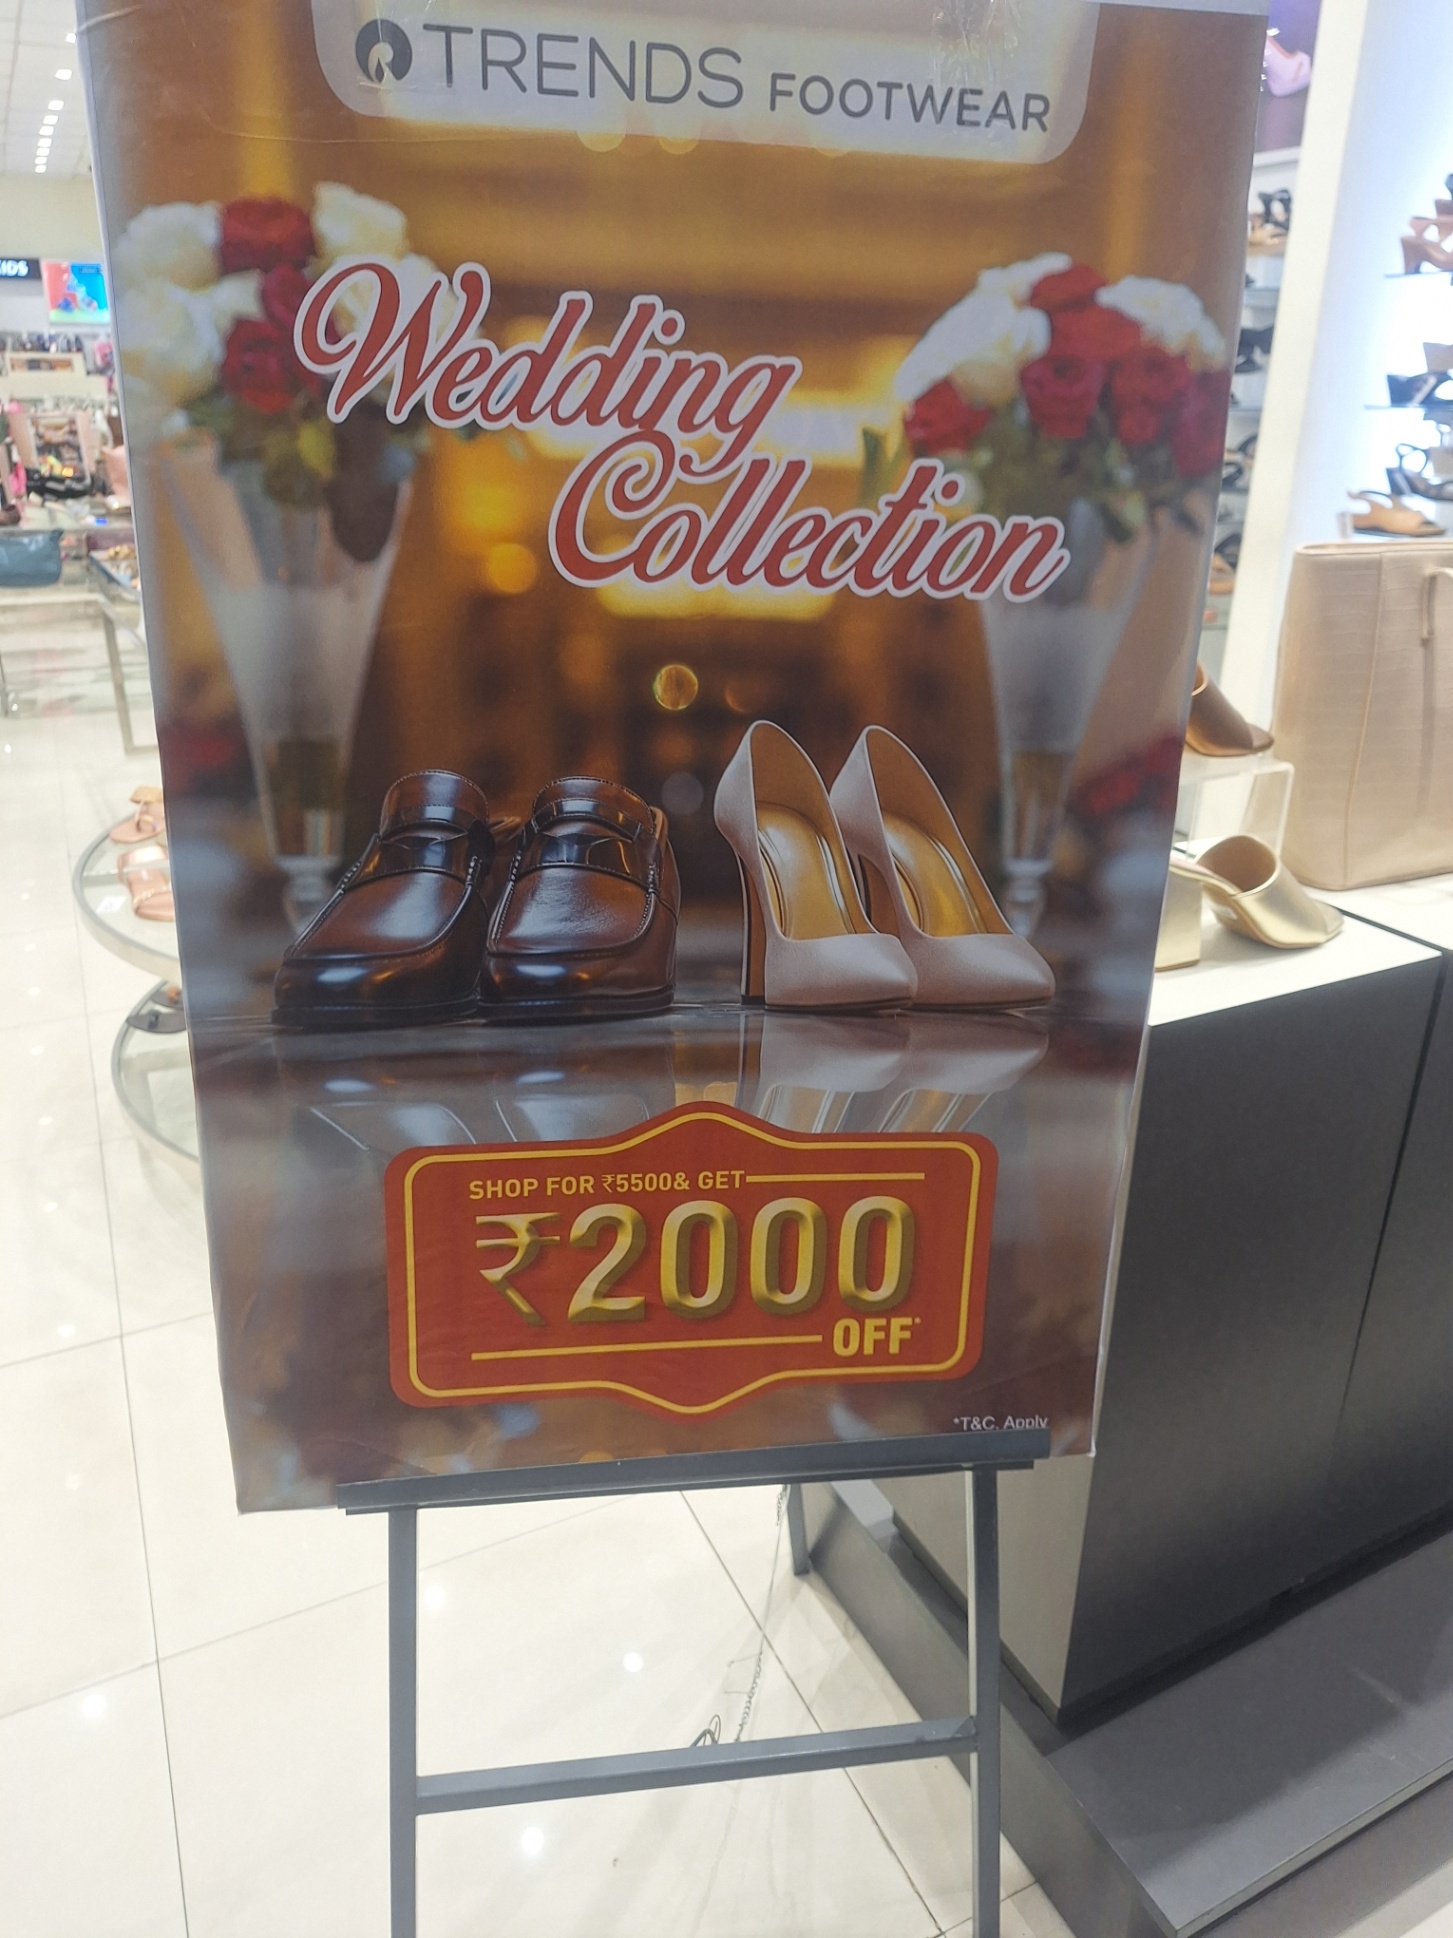 Shop for 5500 Rs & Get 2000 Rs ALL FOOTWEAR @Trends Footwear DB City Mall , Bhopal